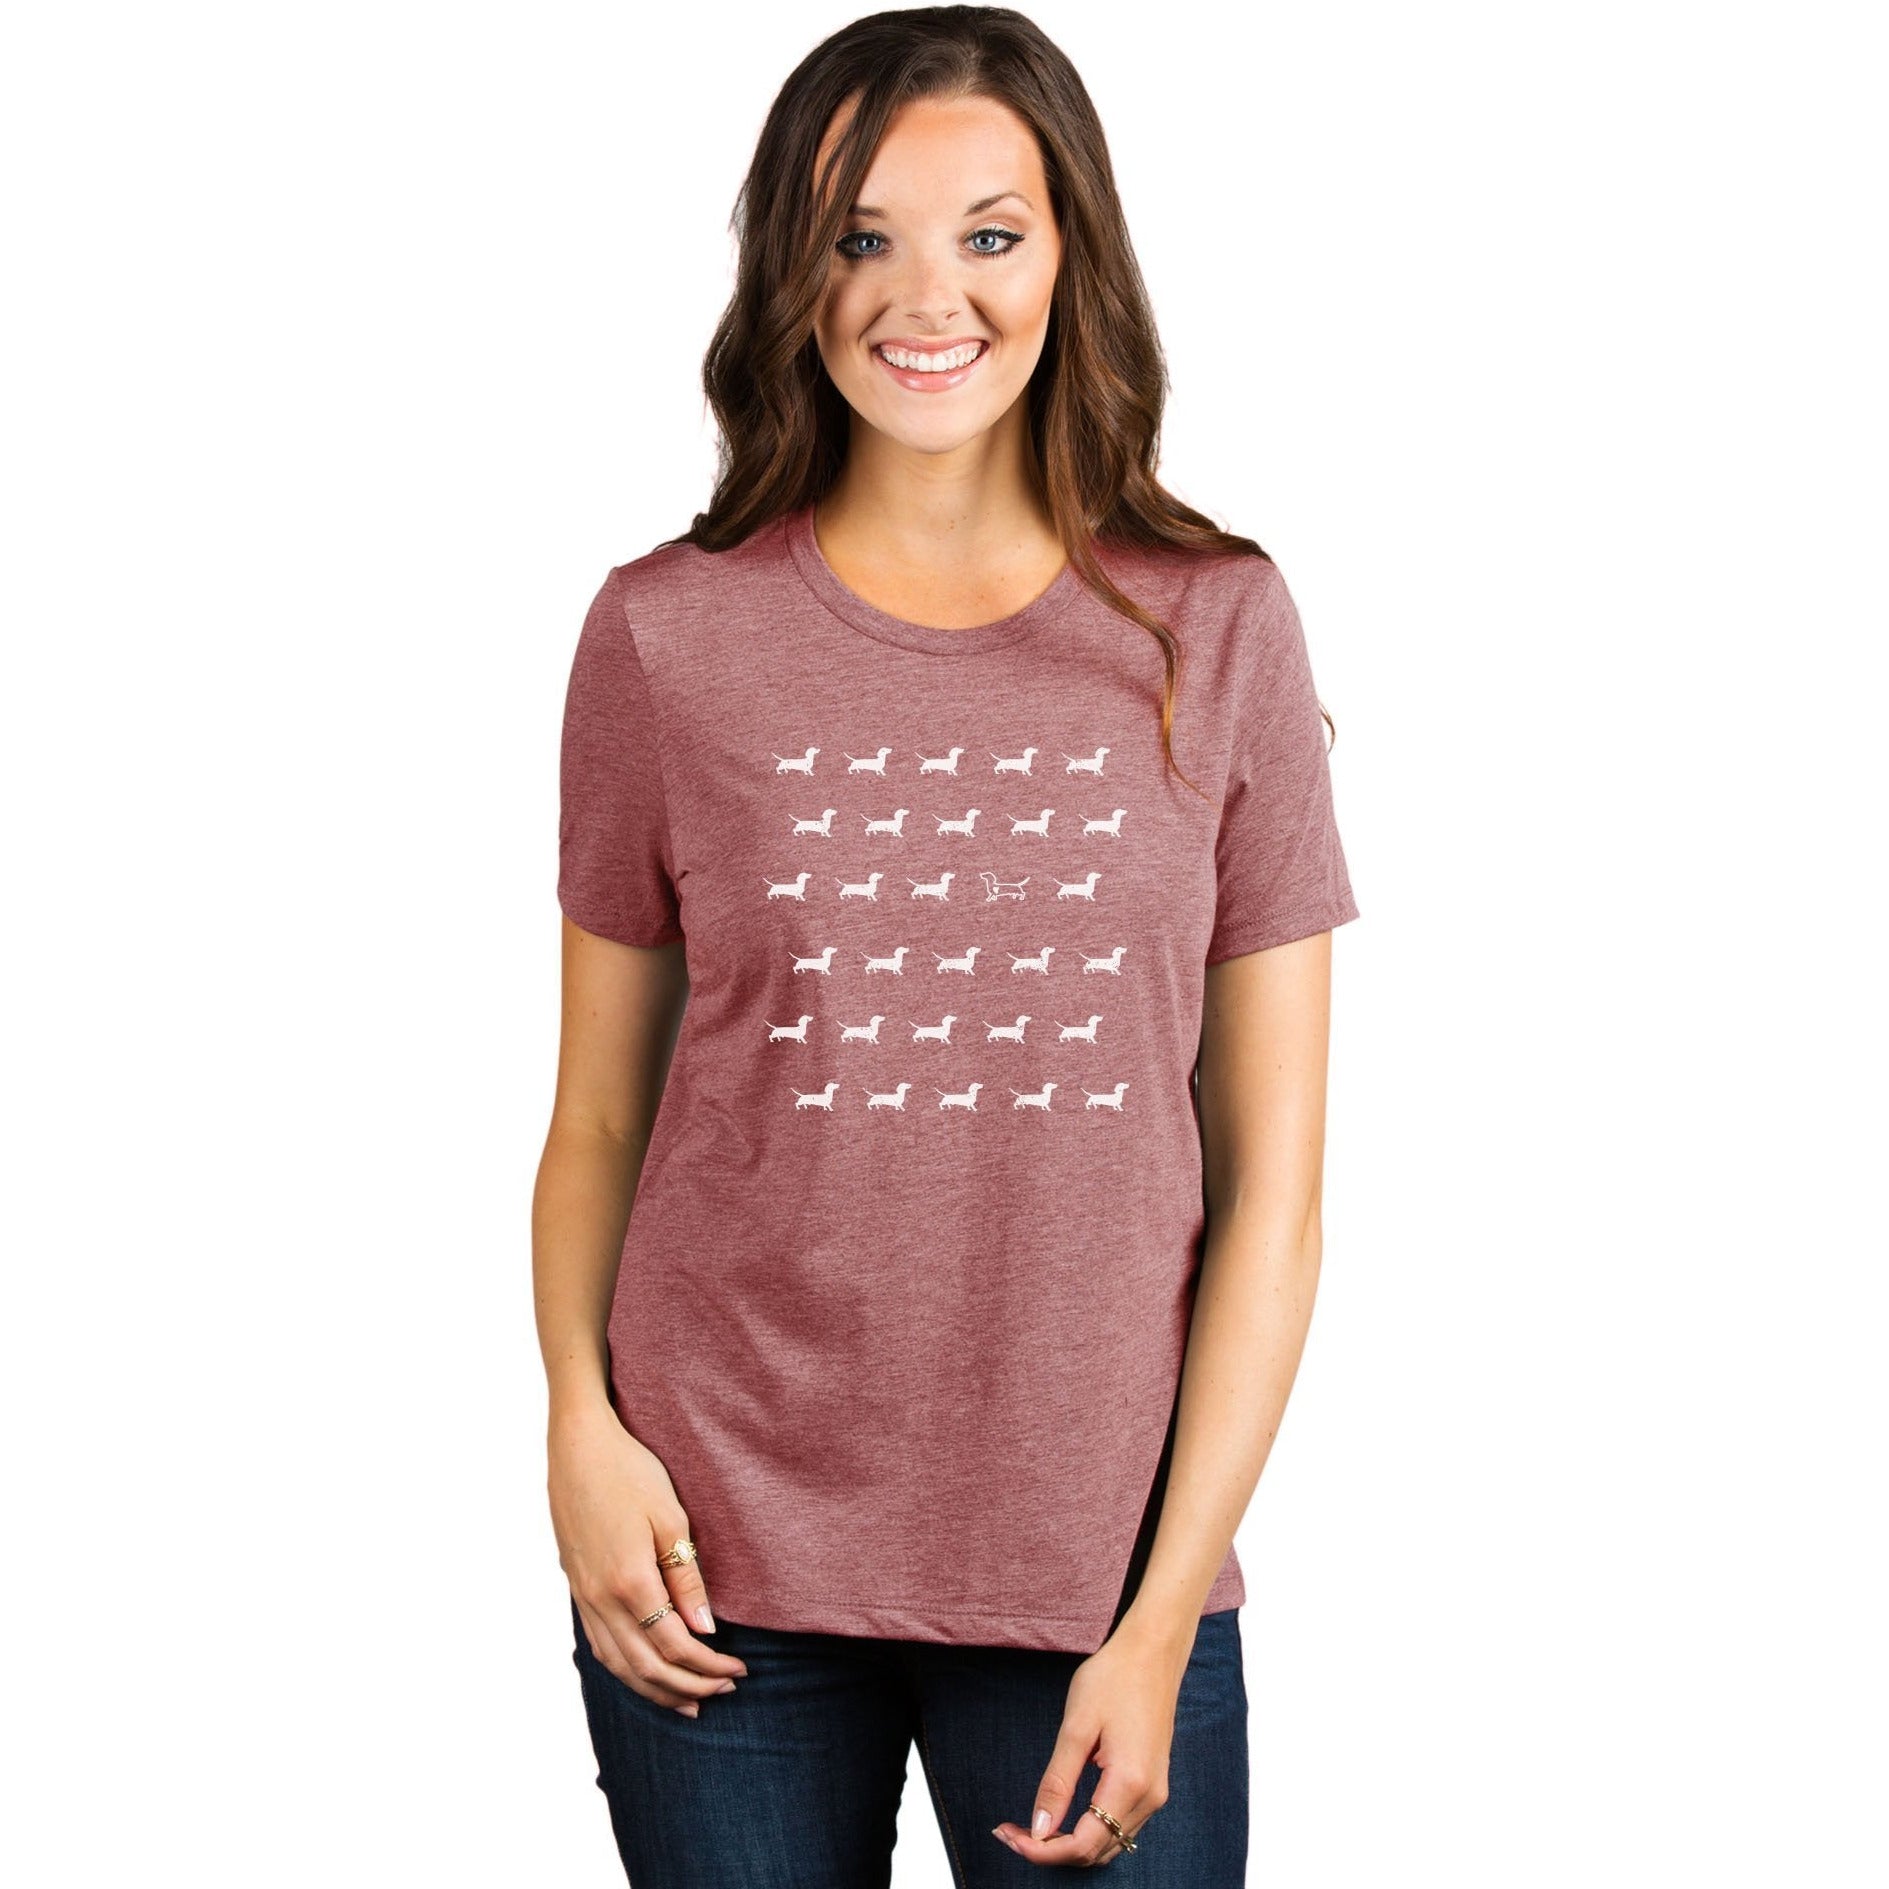 Dachshund Stand Out Women's Relaxed Crewneck T-Shirt Top Tee Heather Rouge Model
